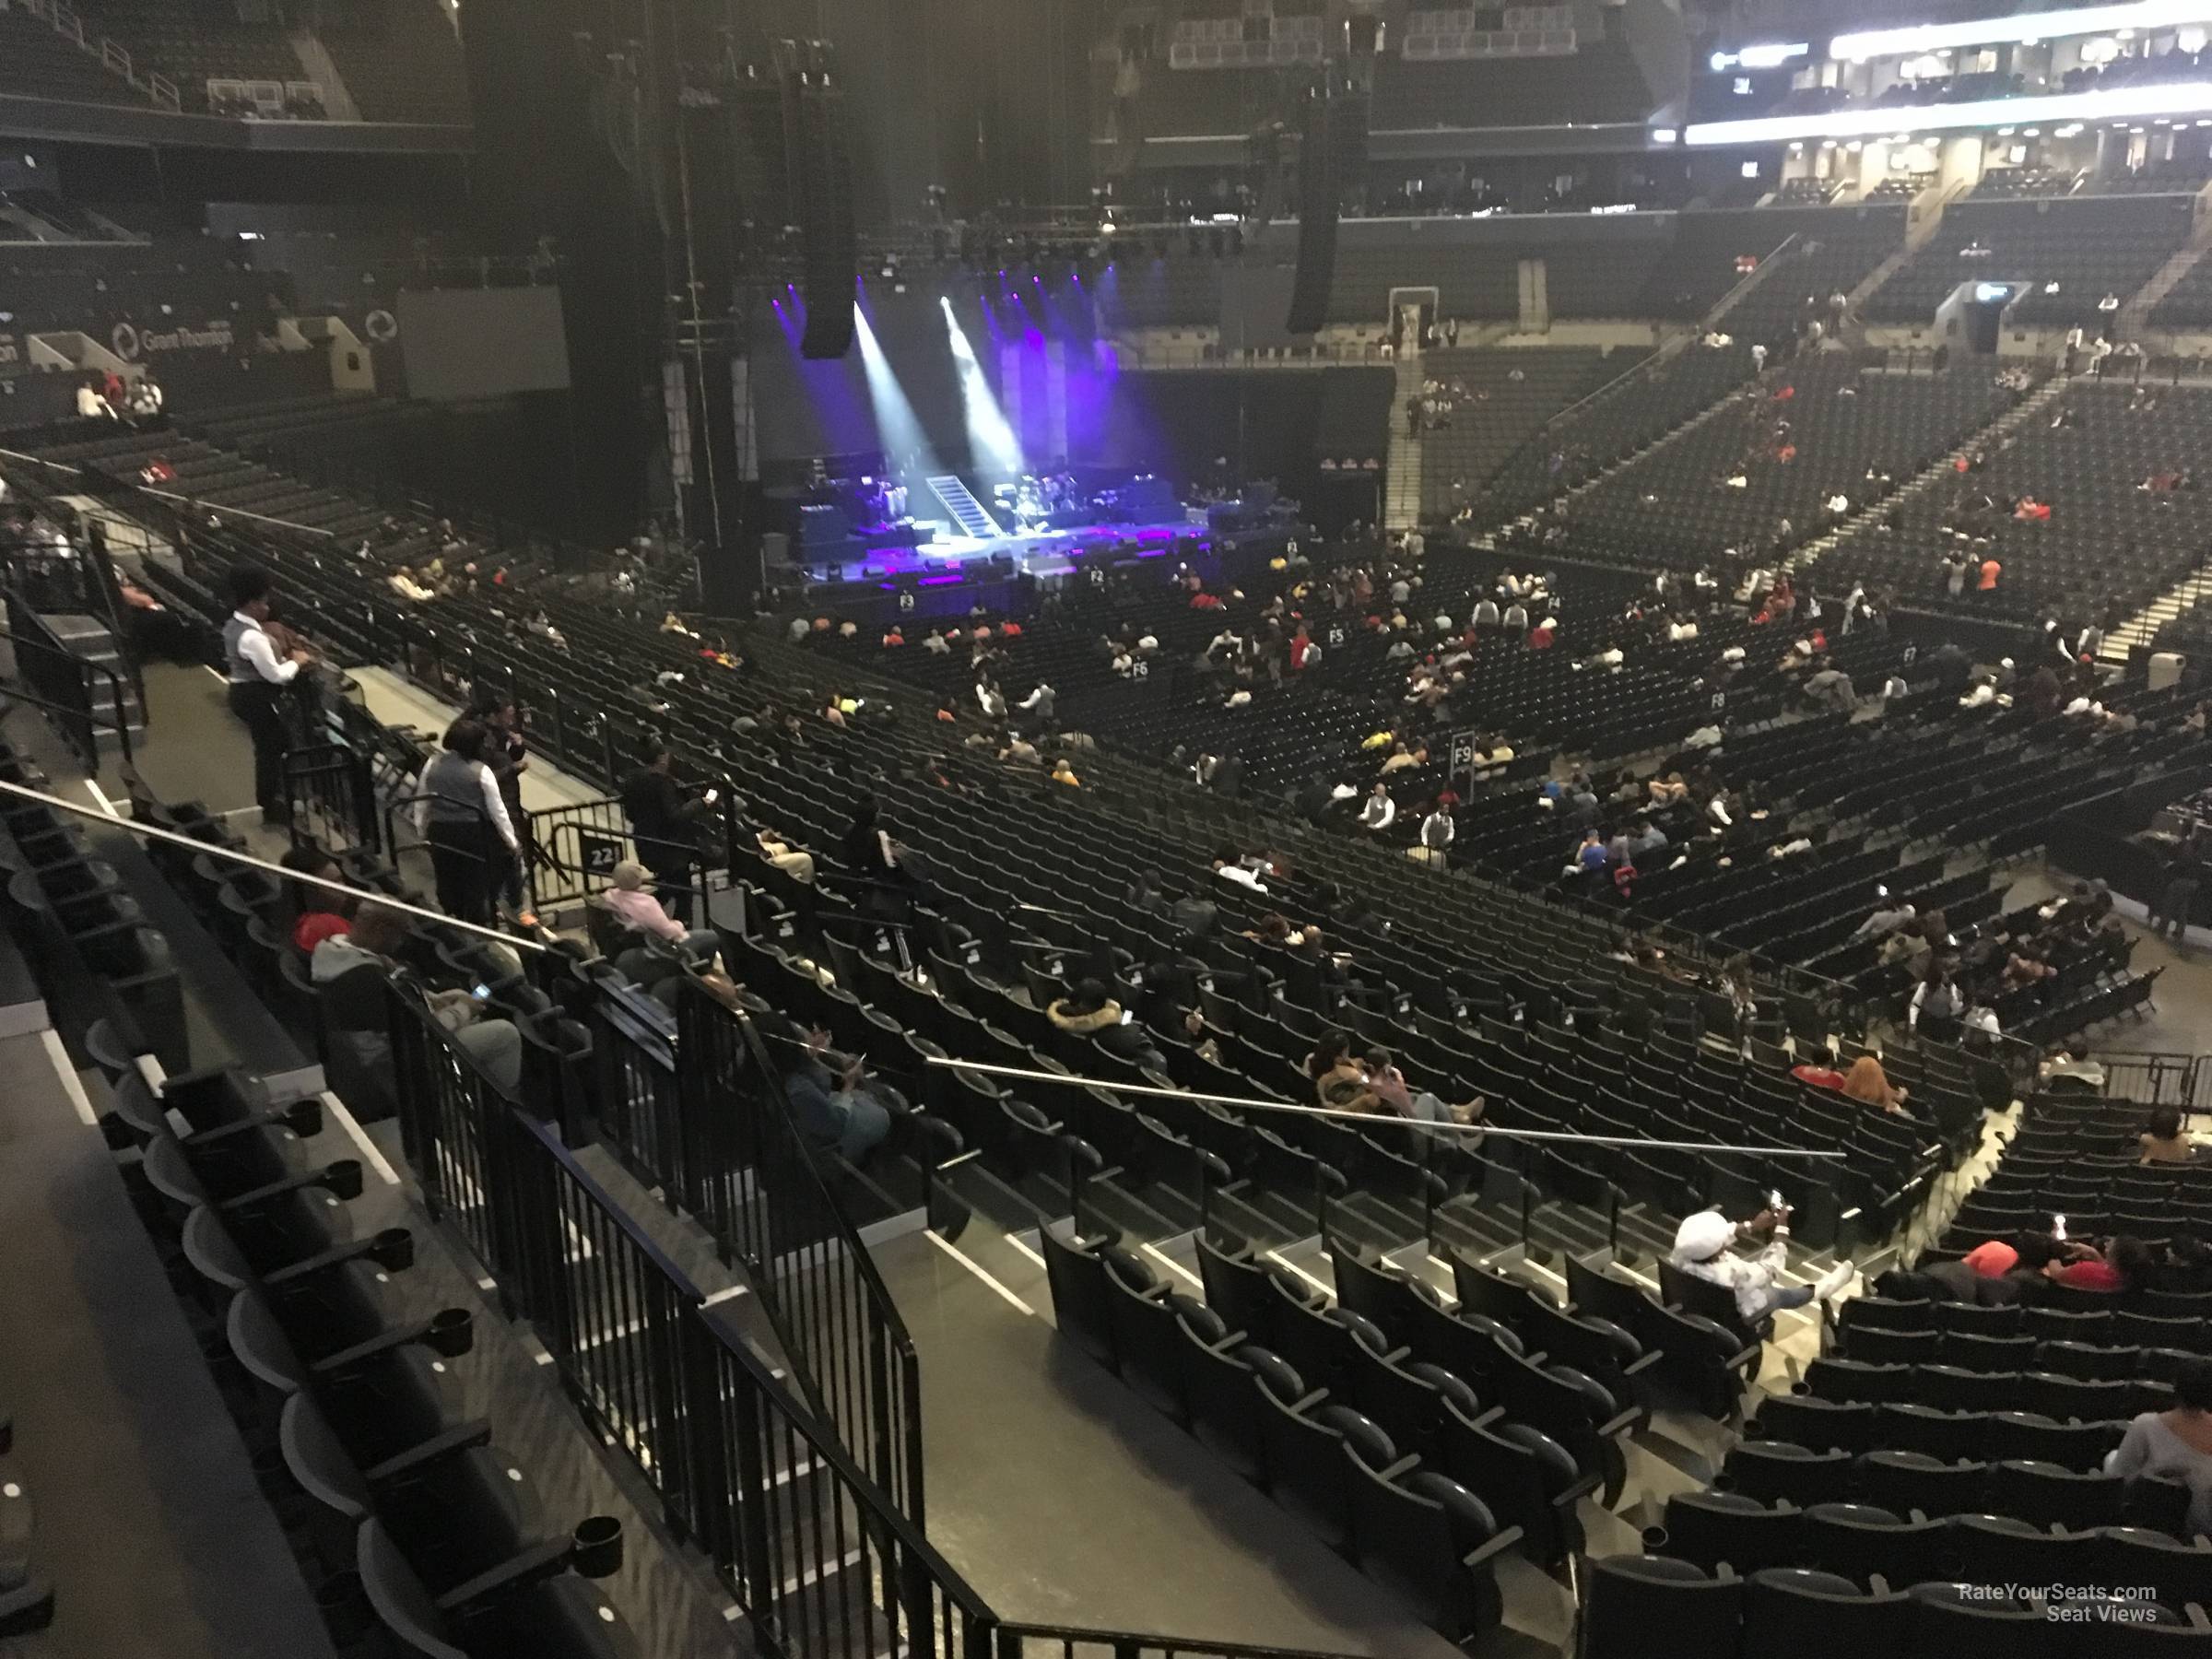 section 121, row 6 seat view  for concert - barclays center